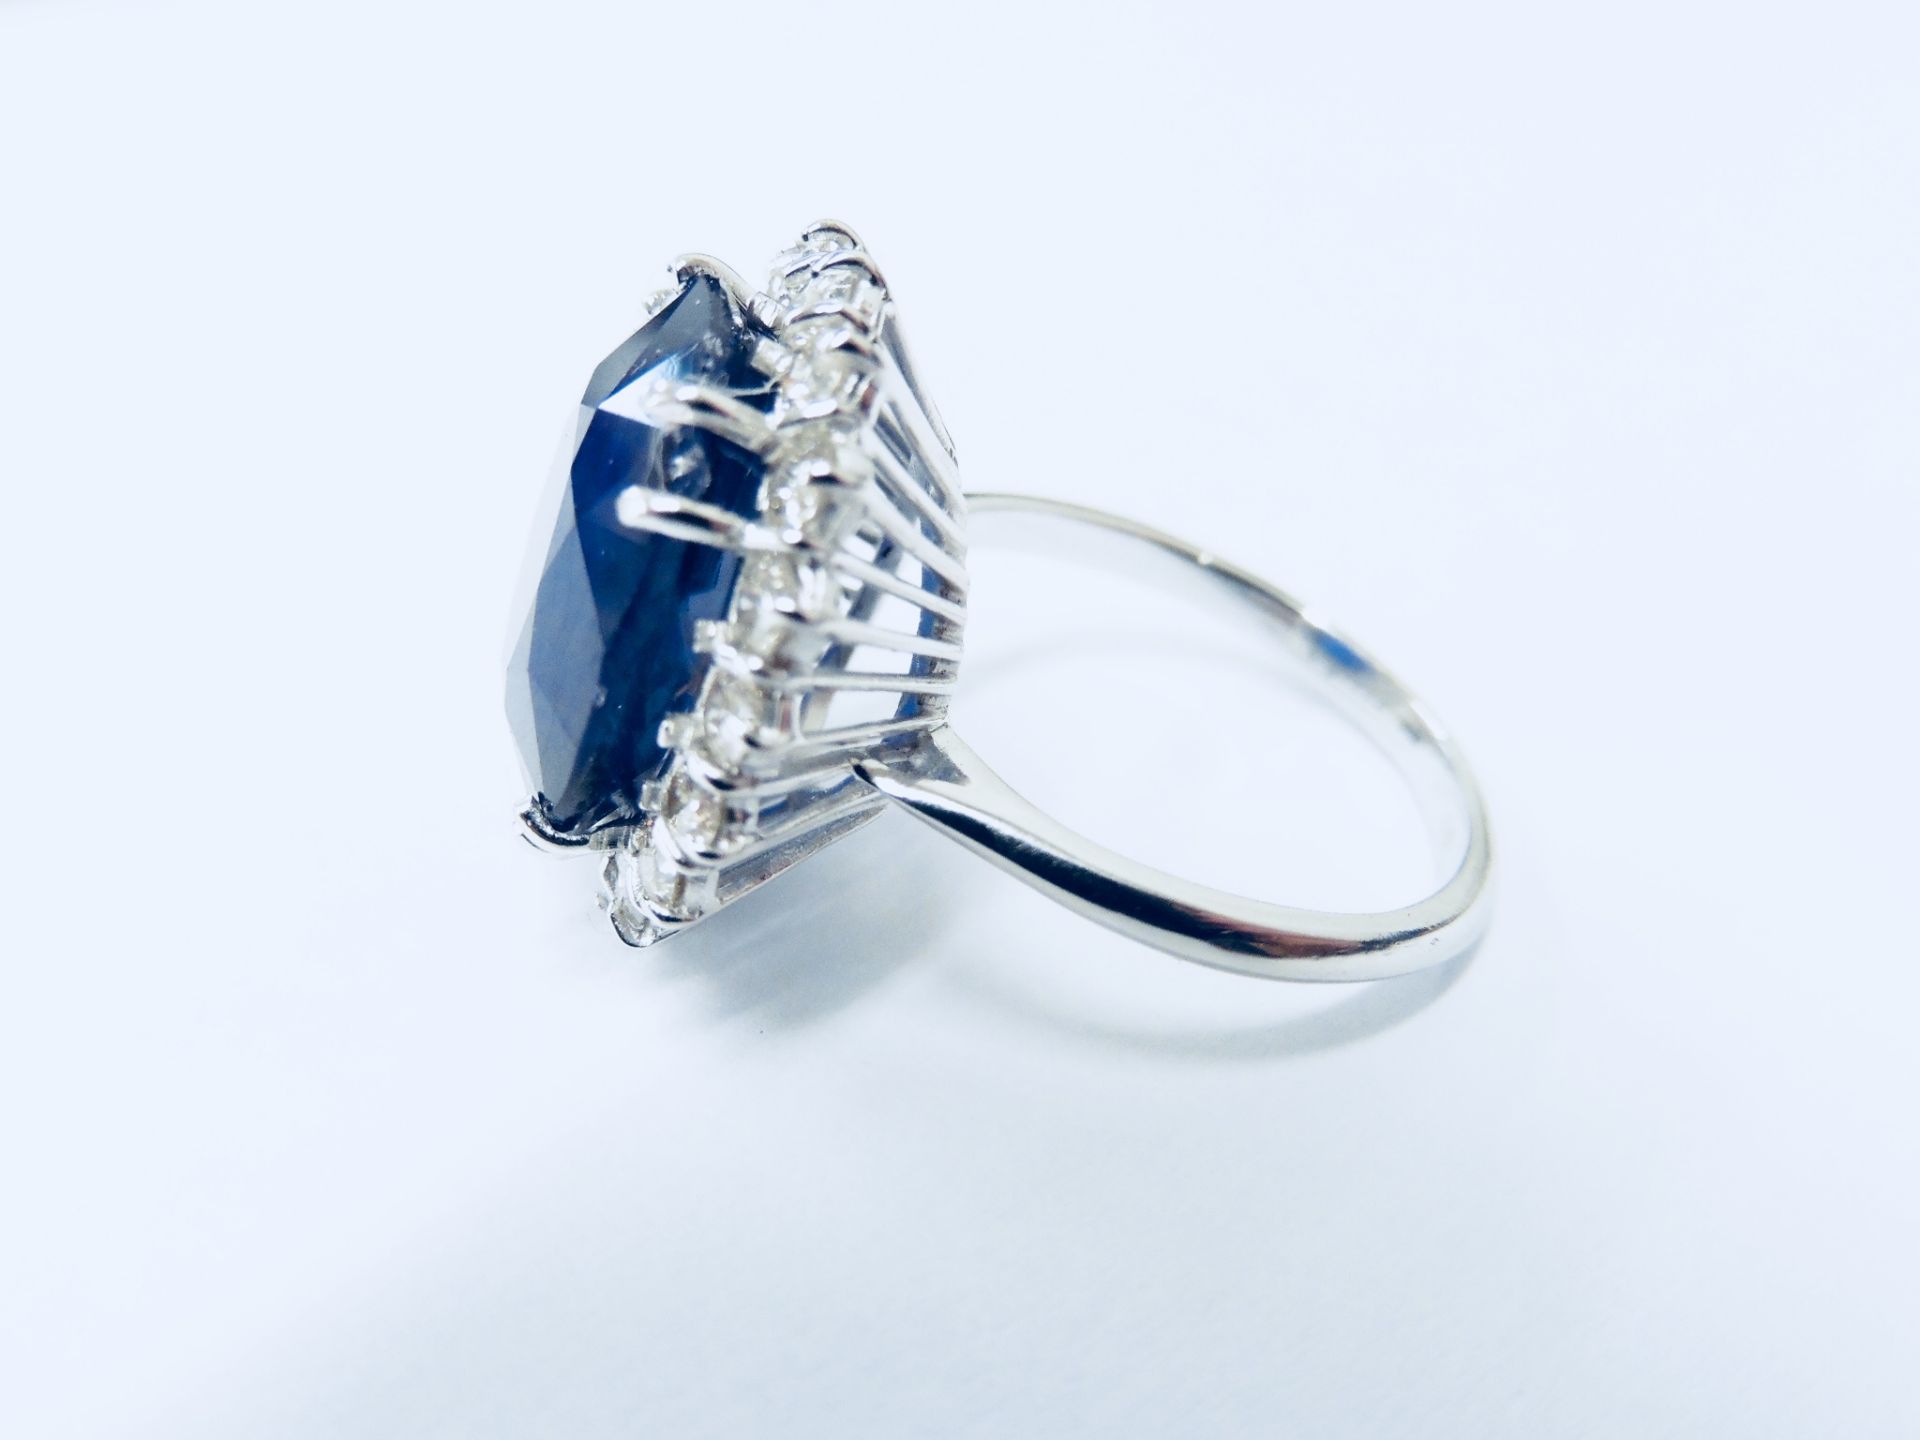 10Ct Sapphire And Diamond Cluster Ring. - Image 8 of 9